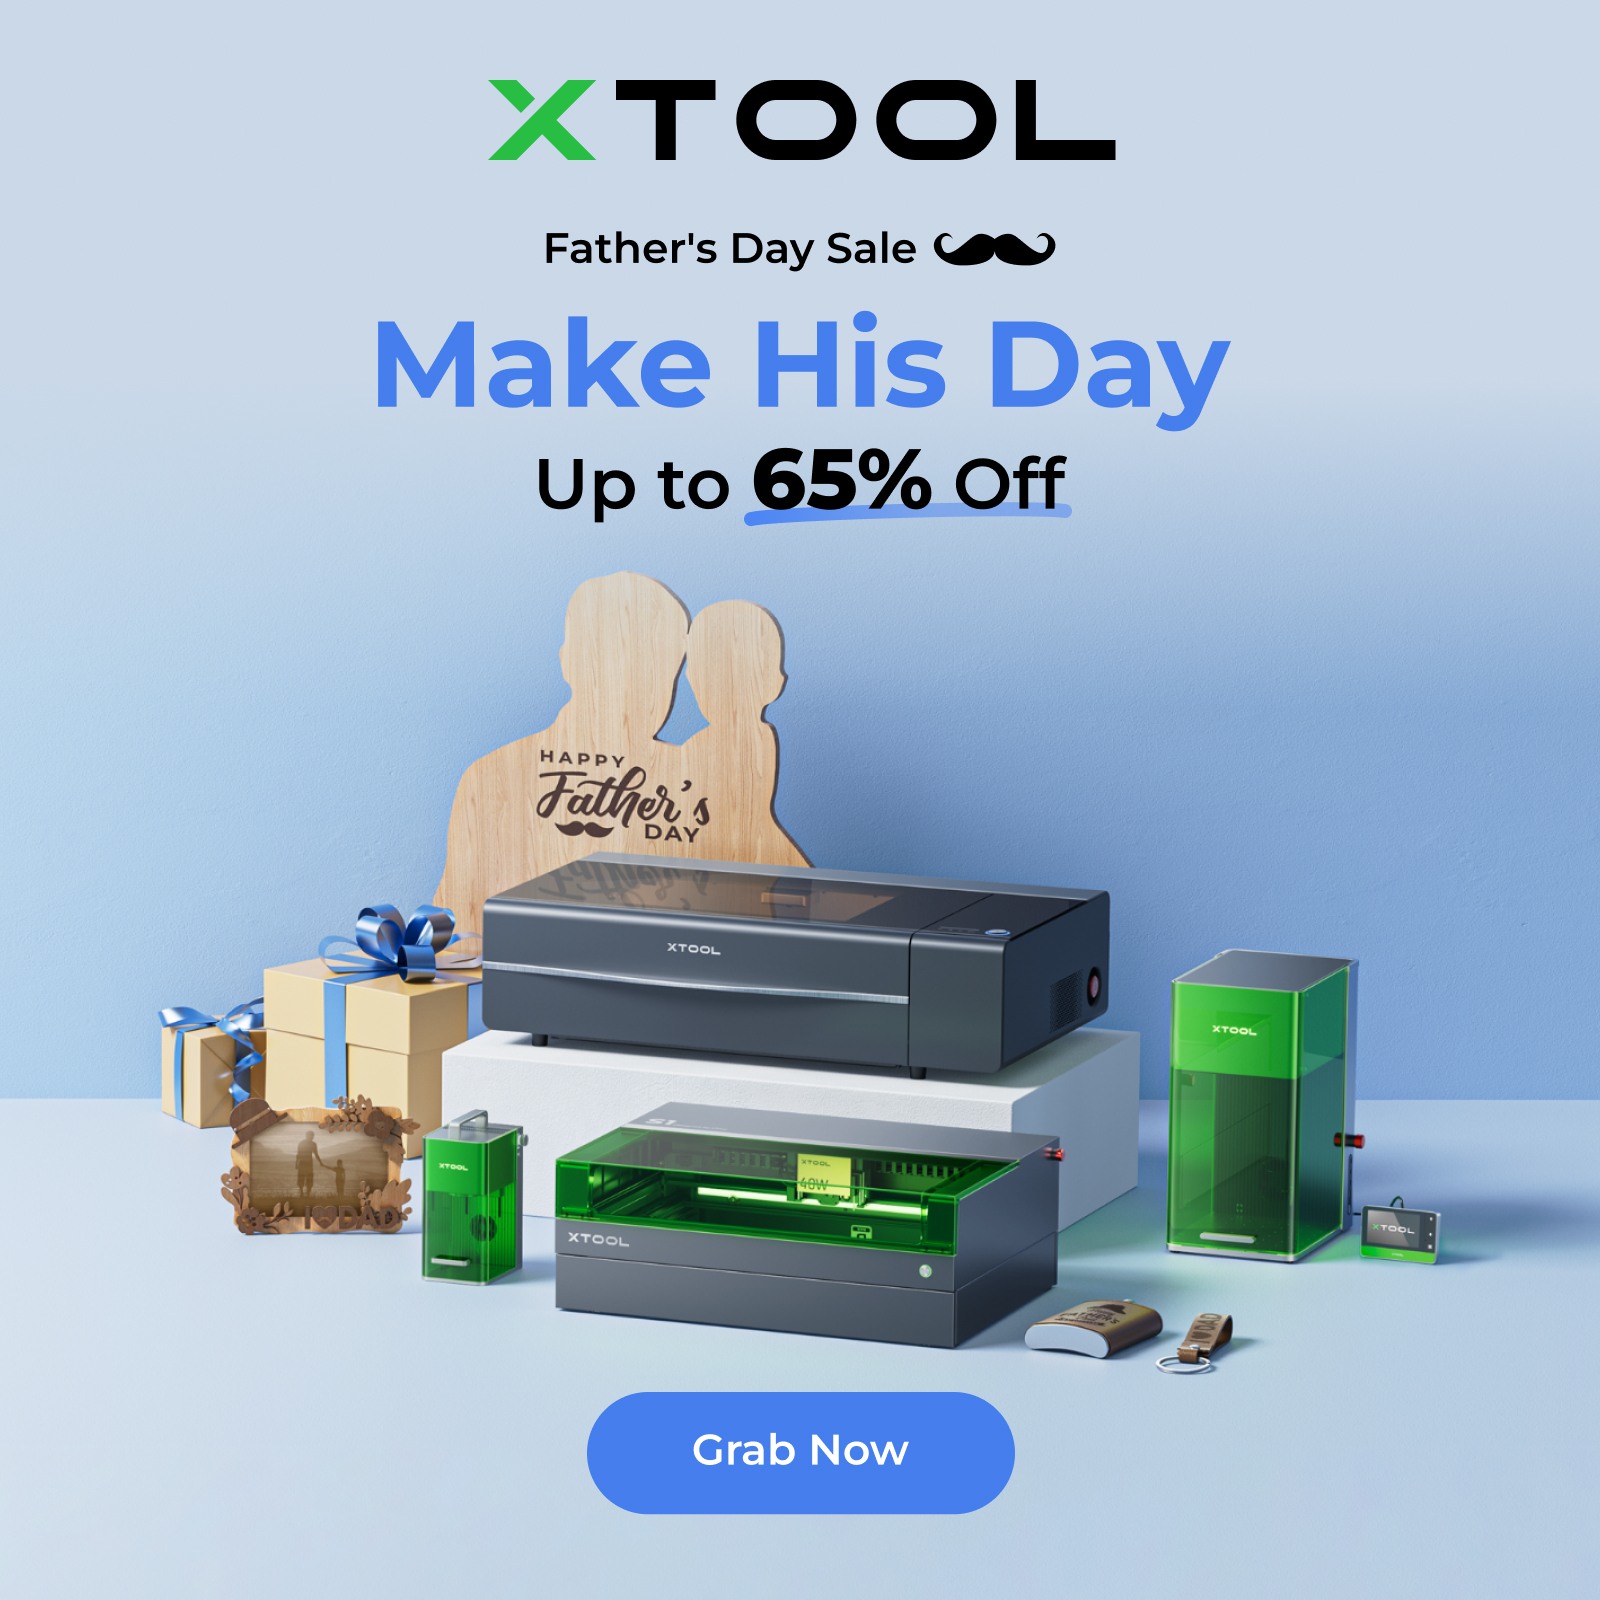 Father's Day Sale: Make His Day